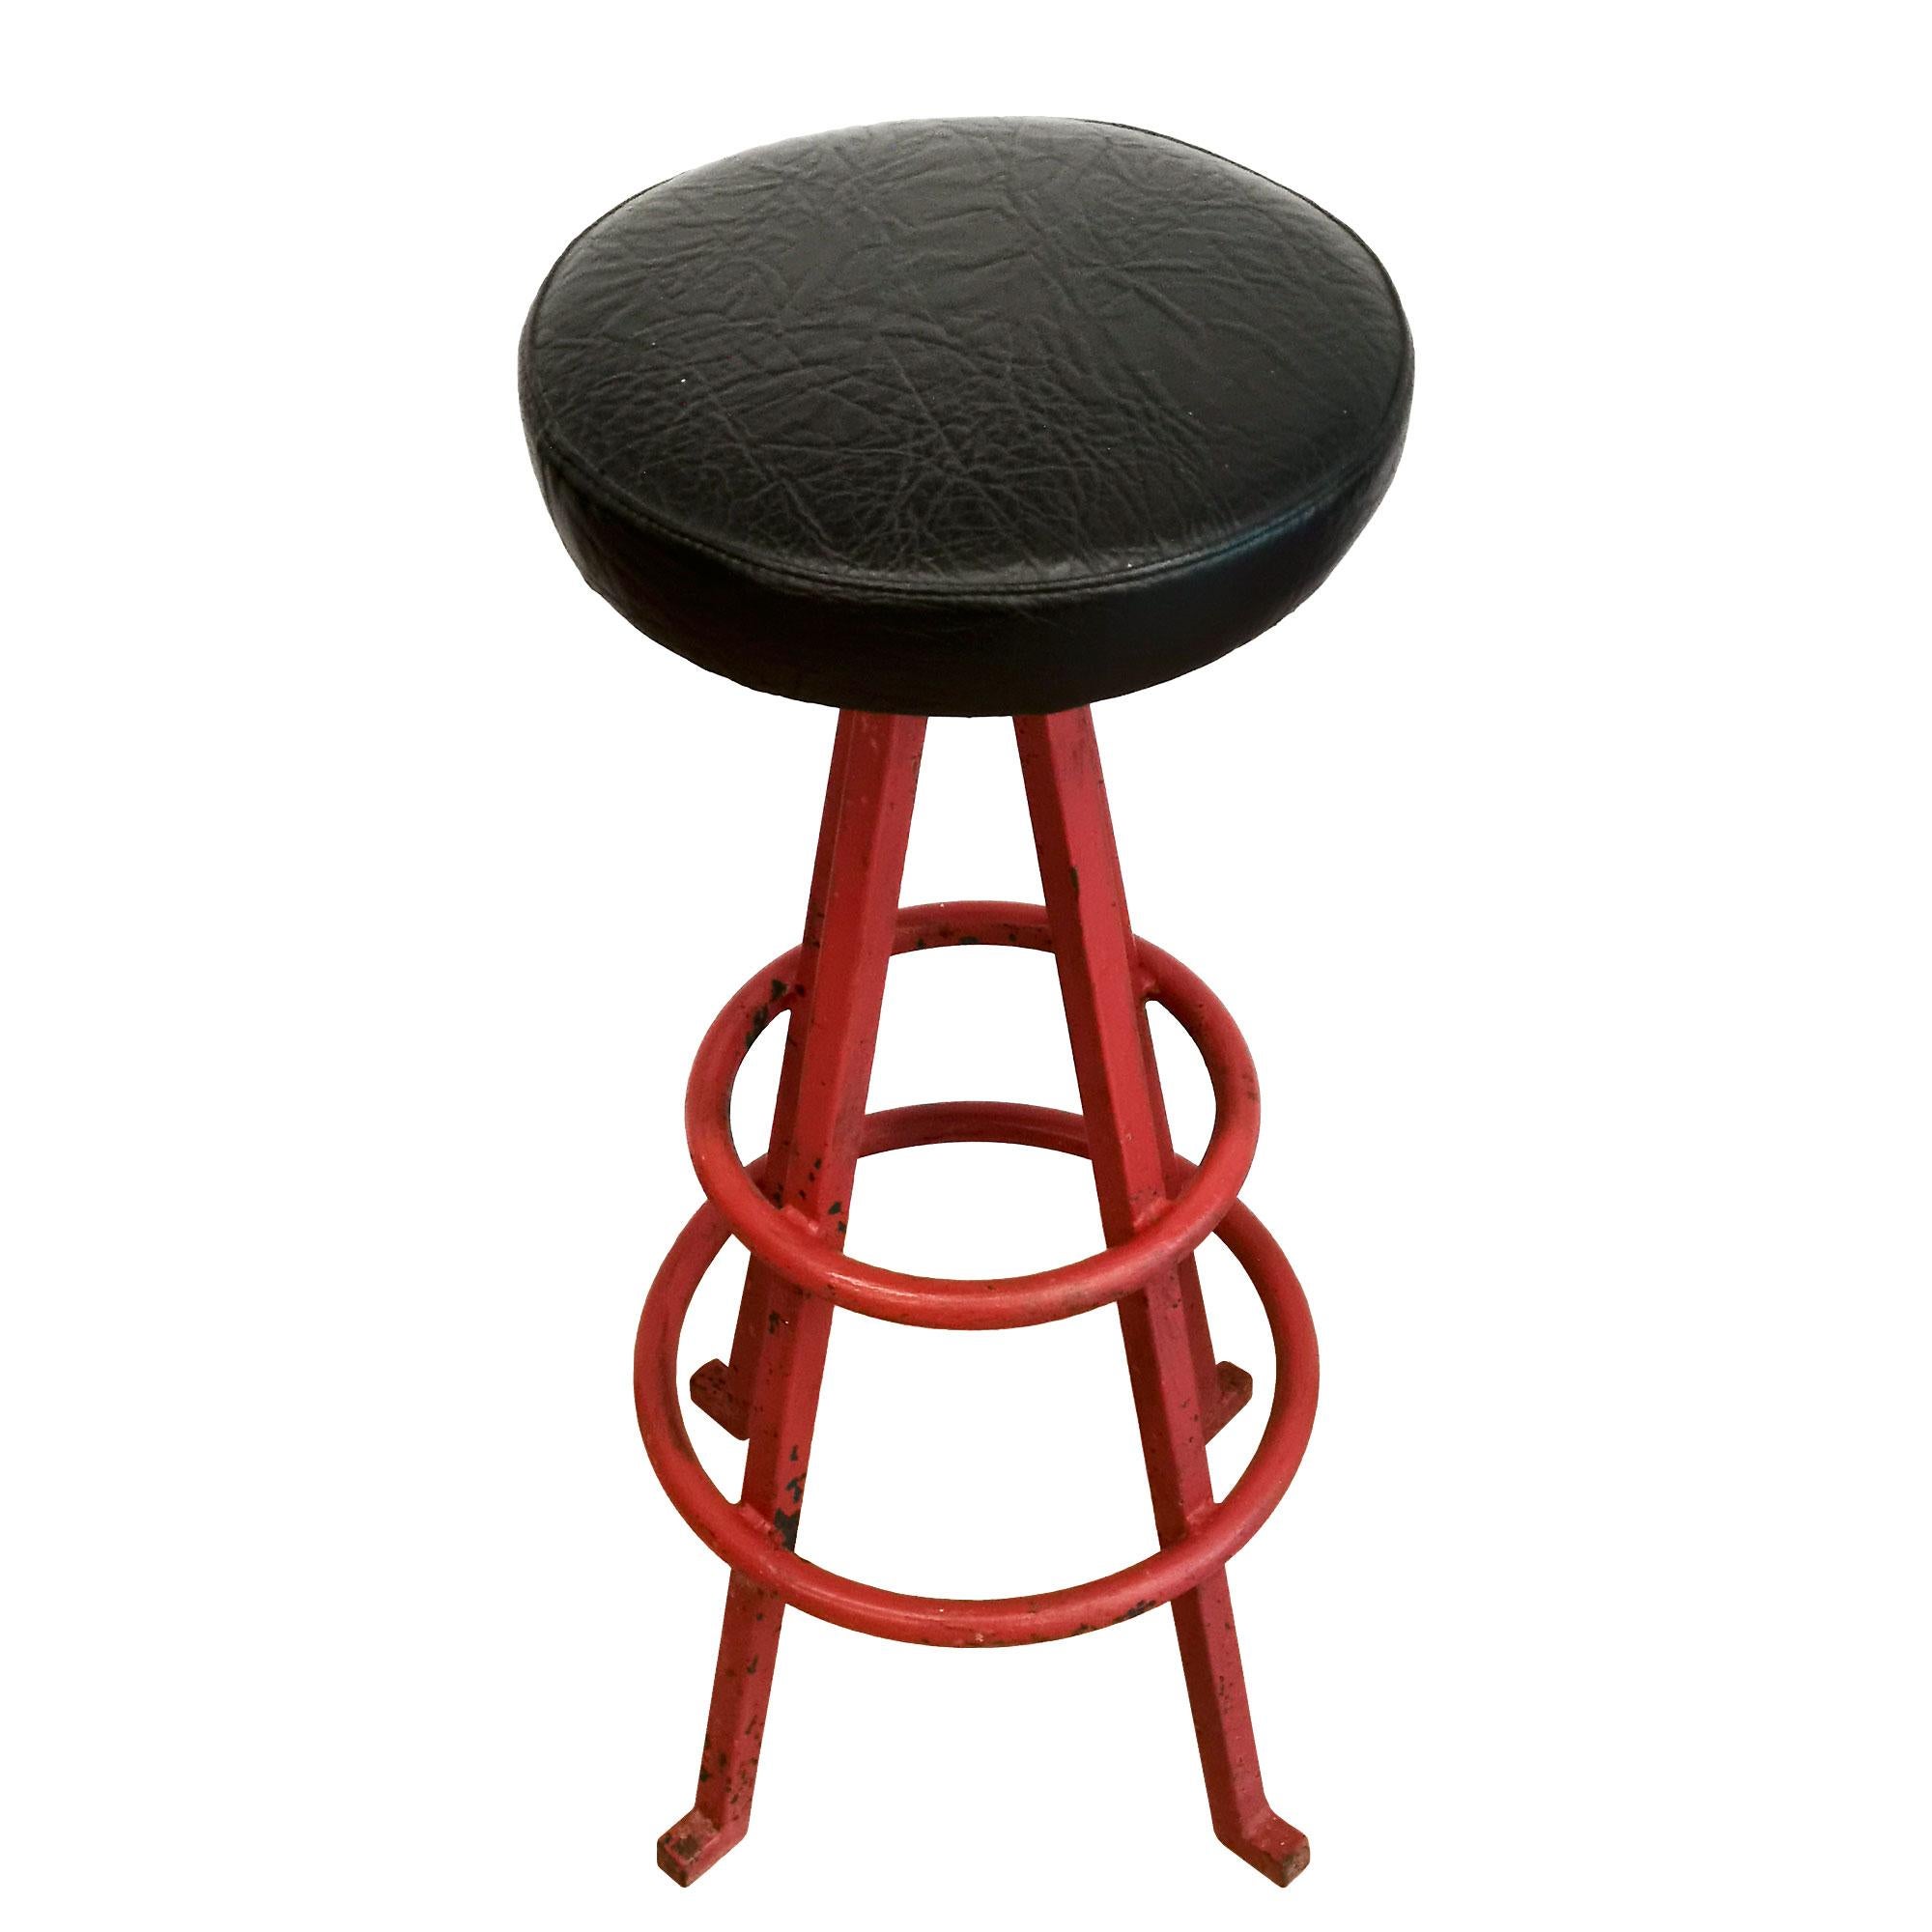 Pair of bar stools, red painted steel and original black leatherette.
Spain, Barcelona c. 1960

Diameter base cm 40/ seat 30 x 75
Diameter base inches 15.75/ seat 11.81 x 29.53.